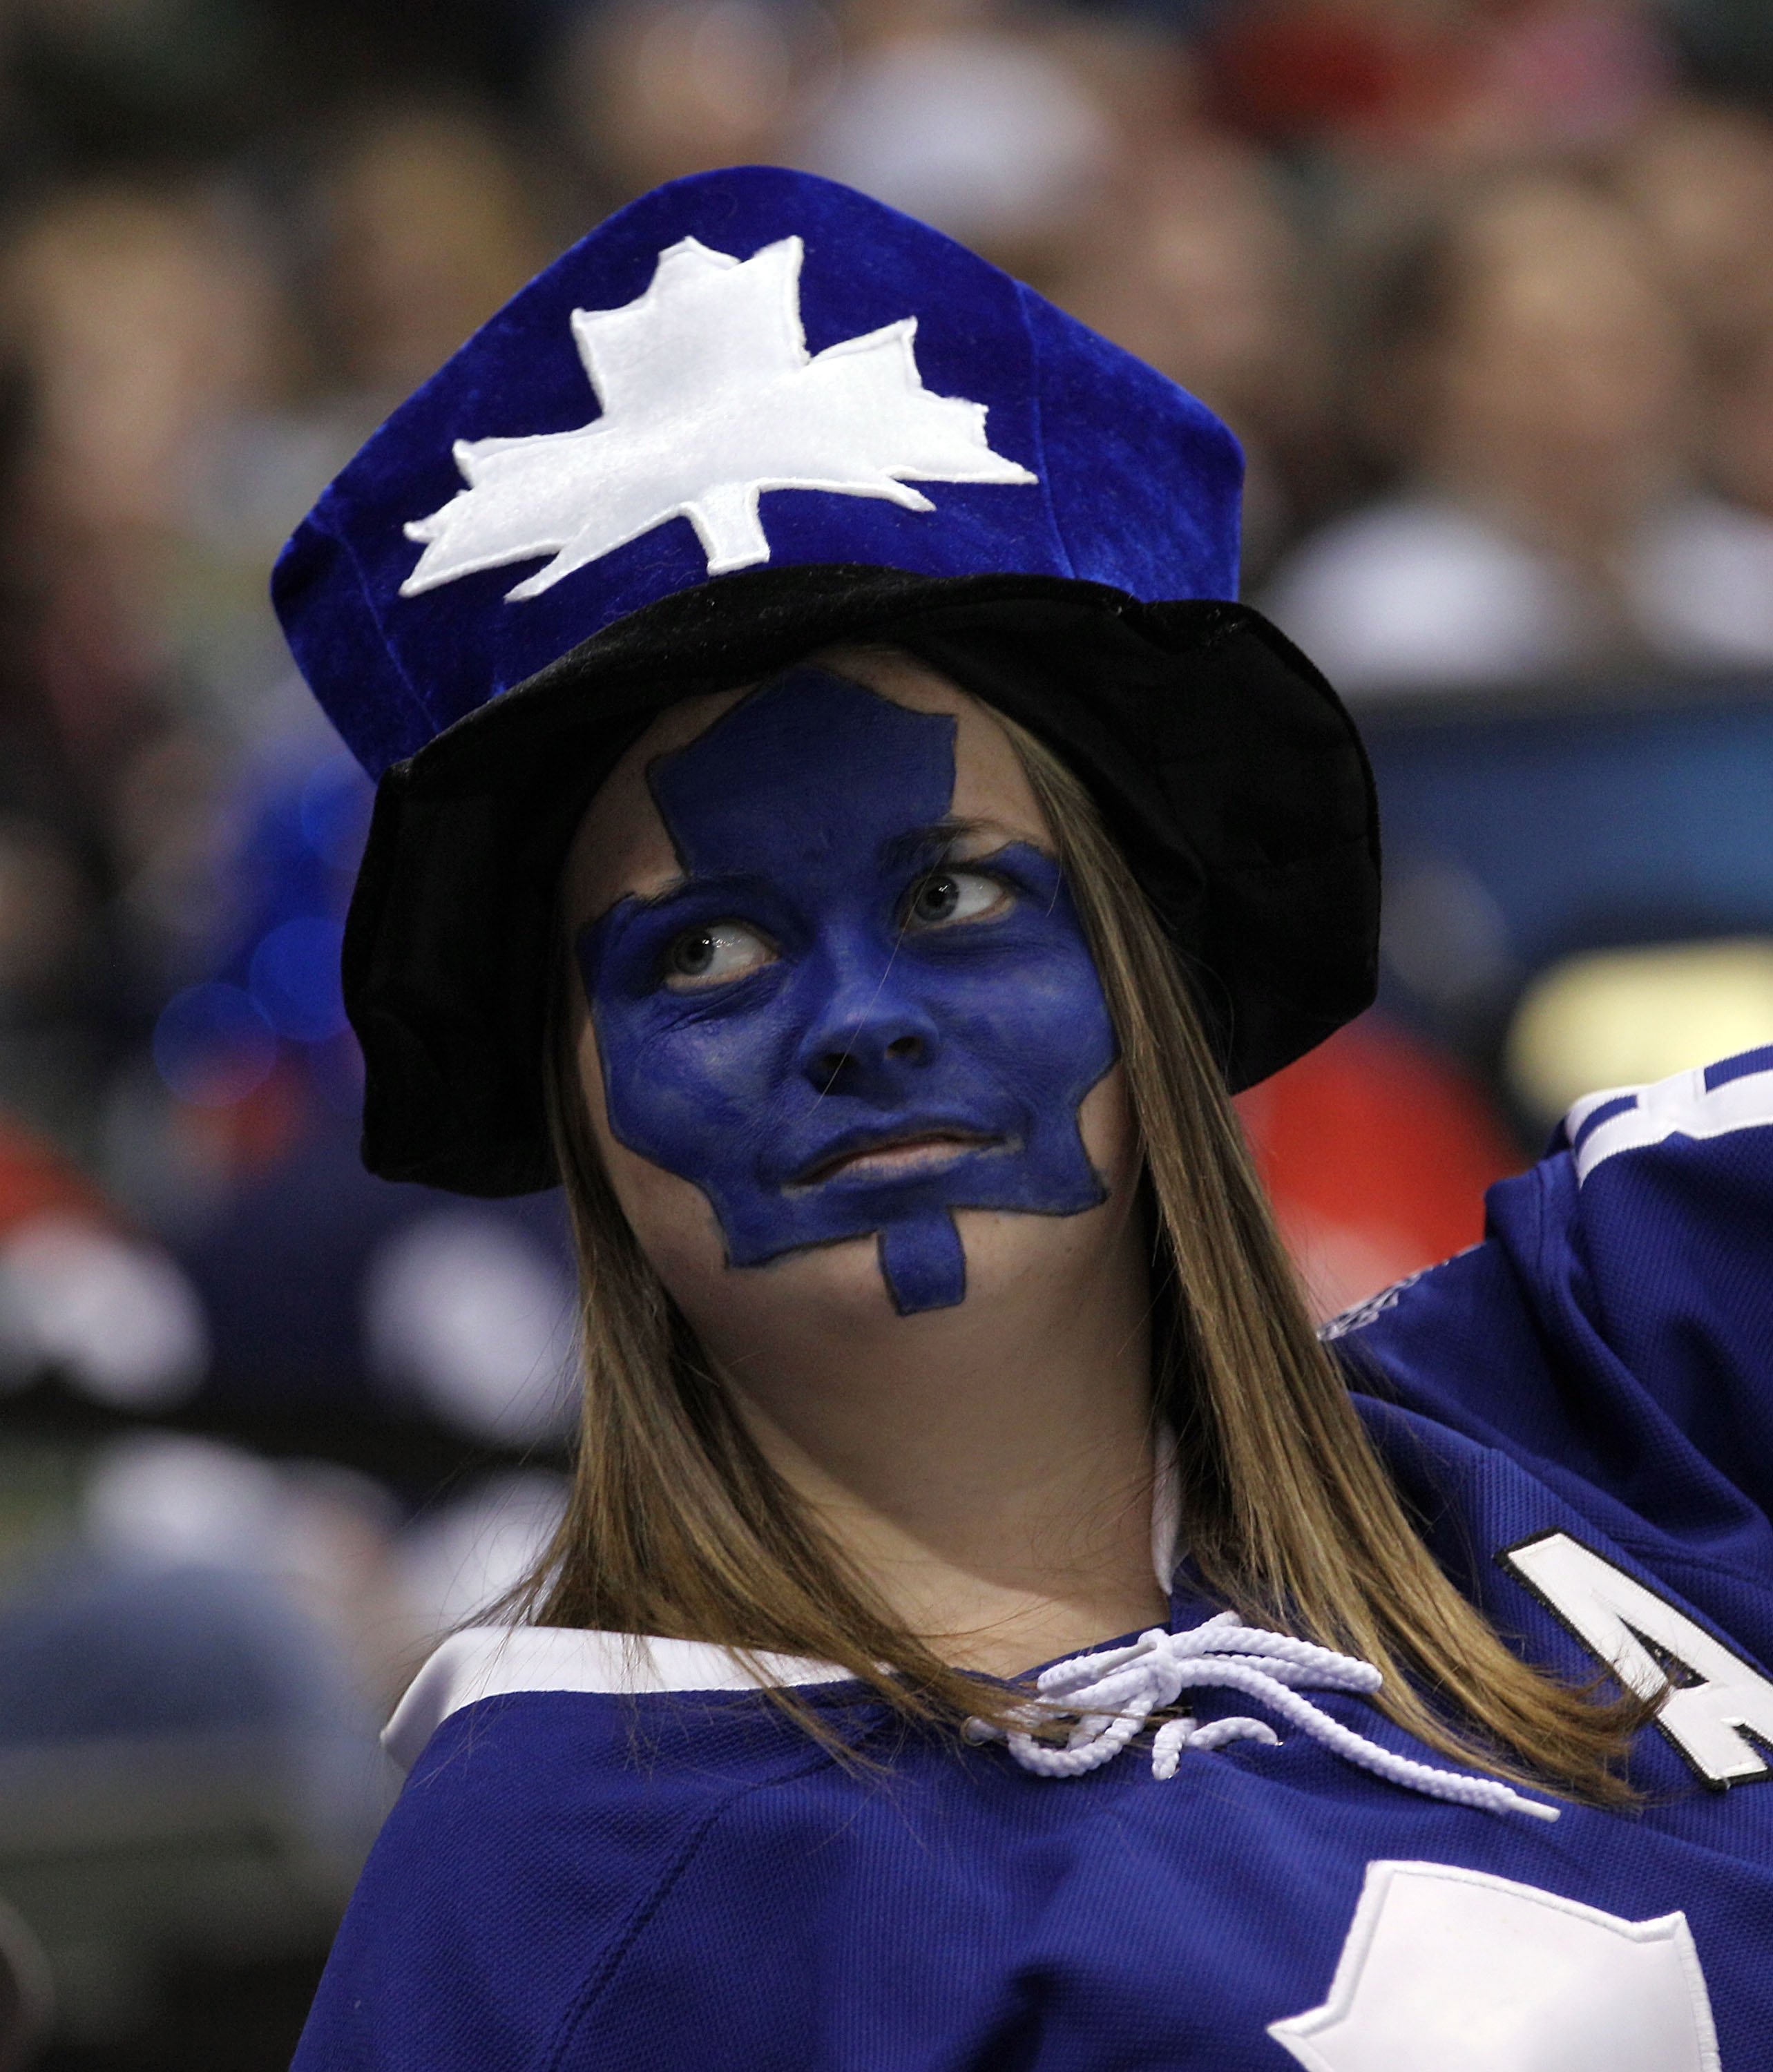 ST PAUL, MN - MARCH 22: A Toronto Maple Leafs fan celebrates the Leafs 3-0 shut out over the Minnesota Wild at the Xcel Energy Center on March 22, 2011 in St Paul, Minnesota. (Photo by Bruce Bennett/Getty Images)